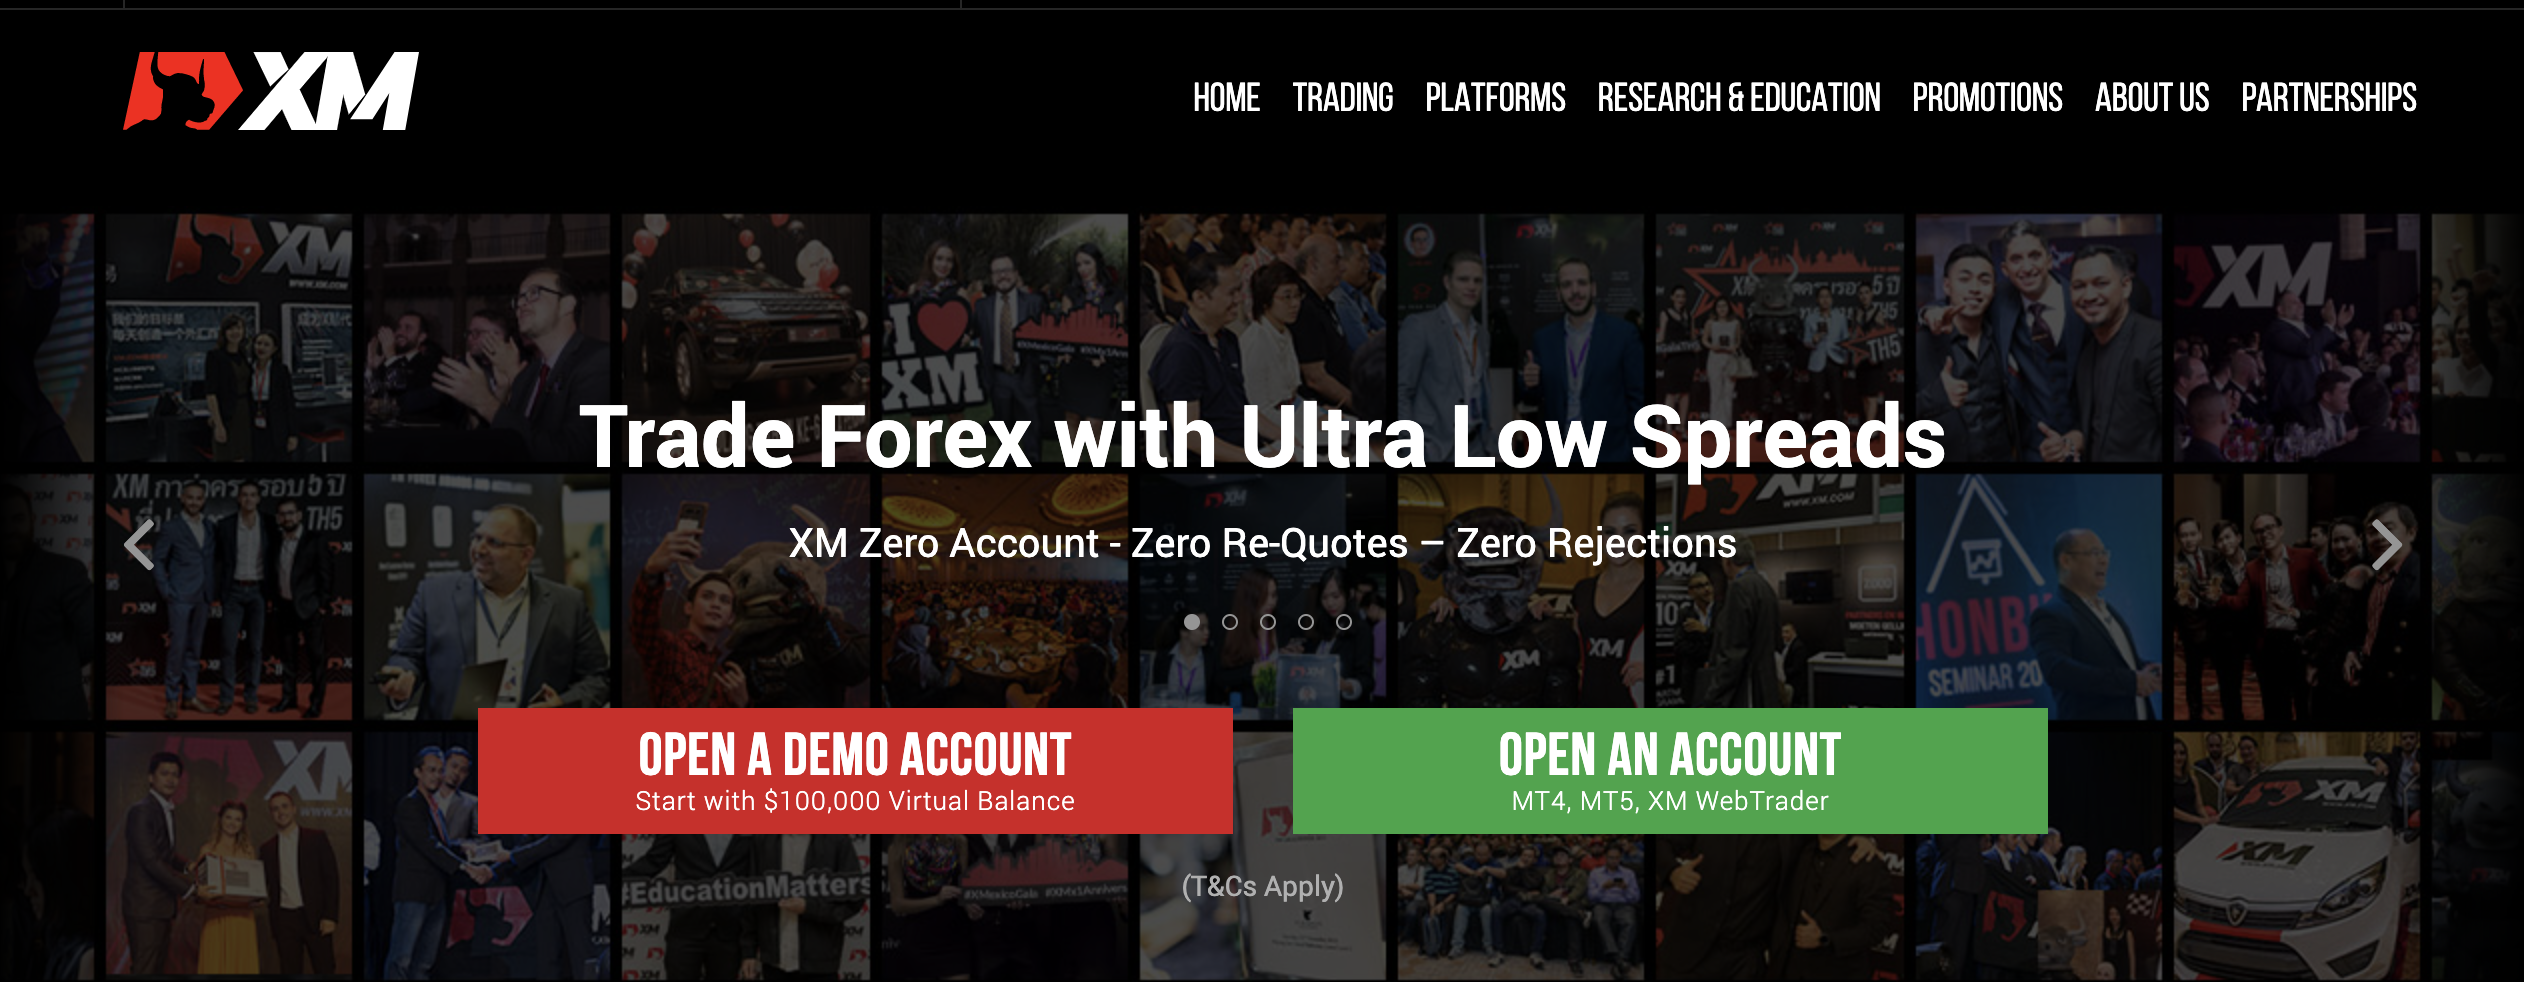 The official website of the forex broker XM Trading